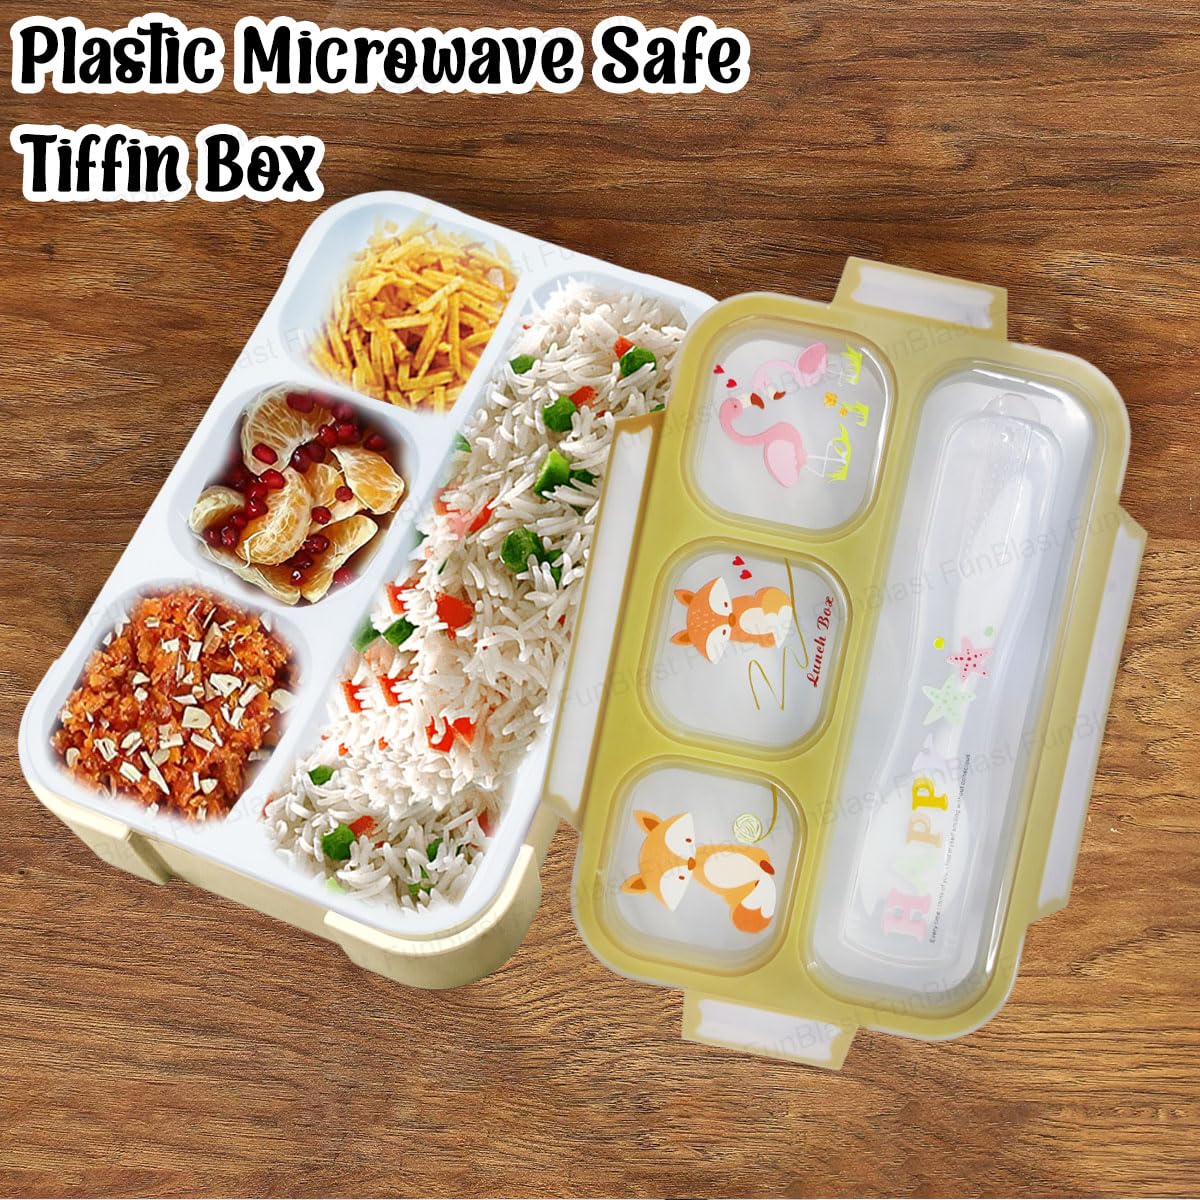 Lunch Box for Kids – Airtight Leak-Proof Tiffin Box, Lunch Box with Fork, Plastic Microwave Safe Tiffin Box with 4 Small Compartment, Bento Box (Green)